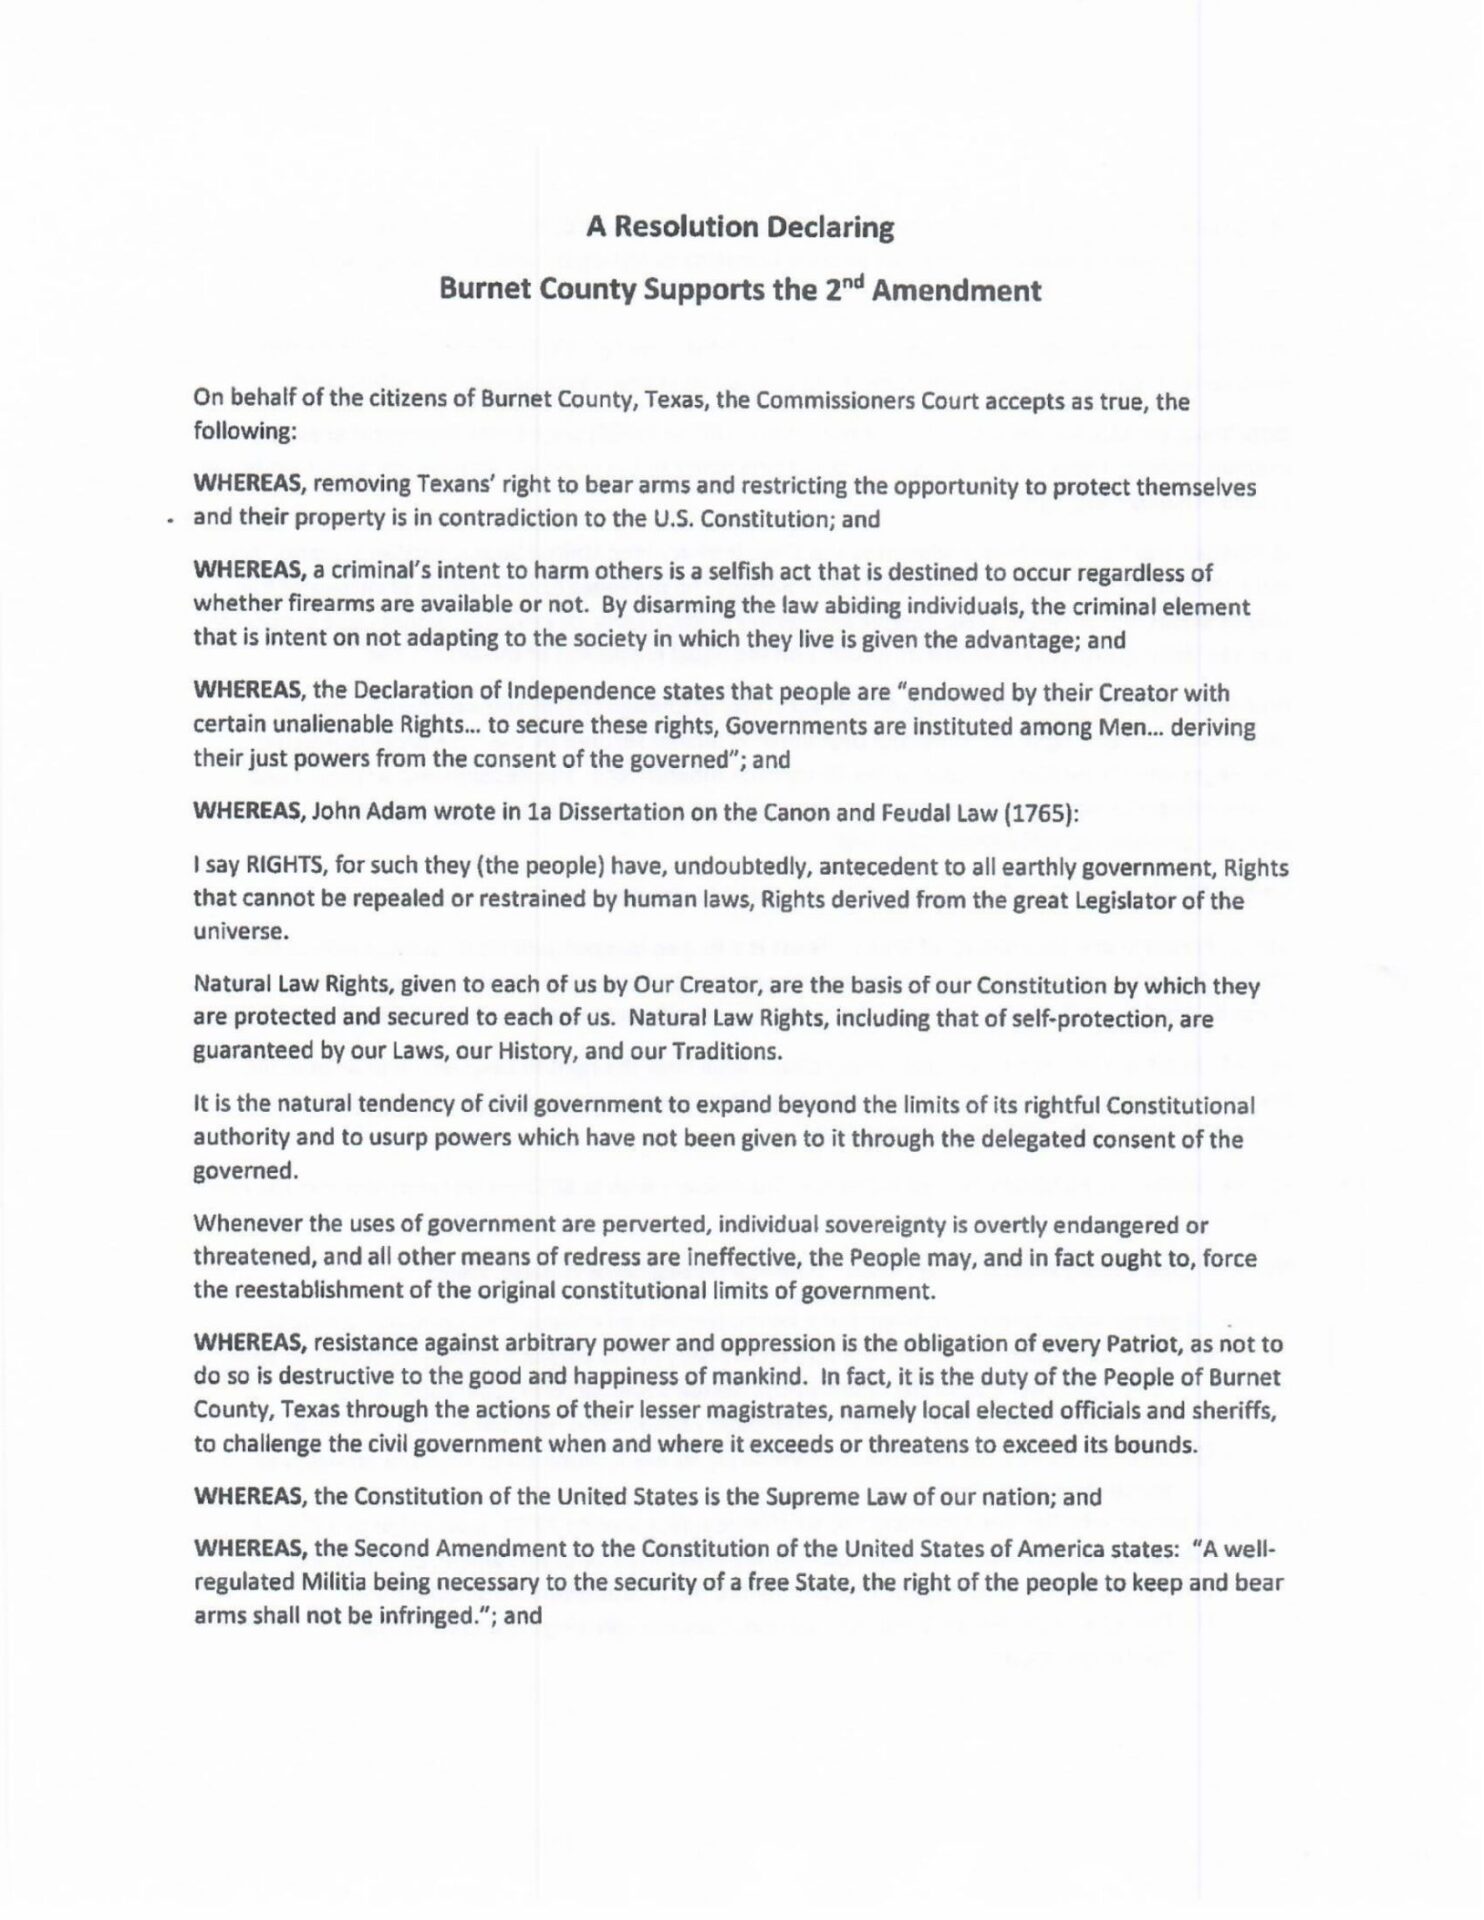 Burnet County Texas 2A Support Resolution PG-1